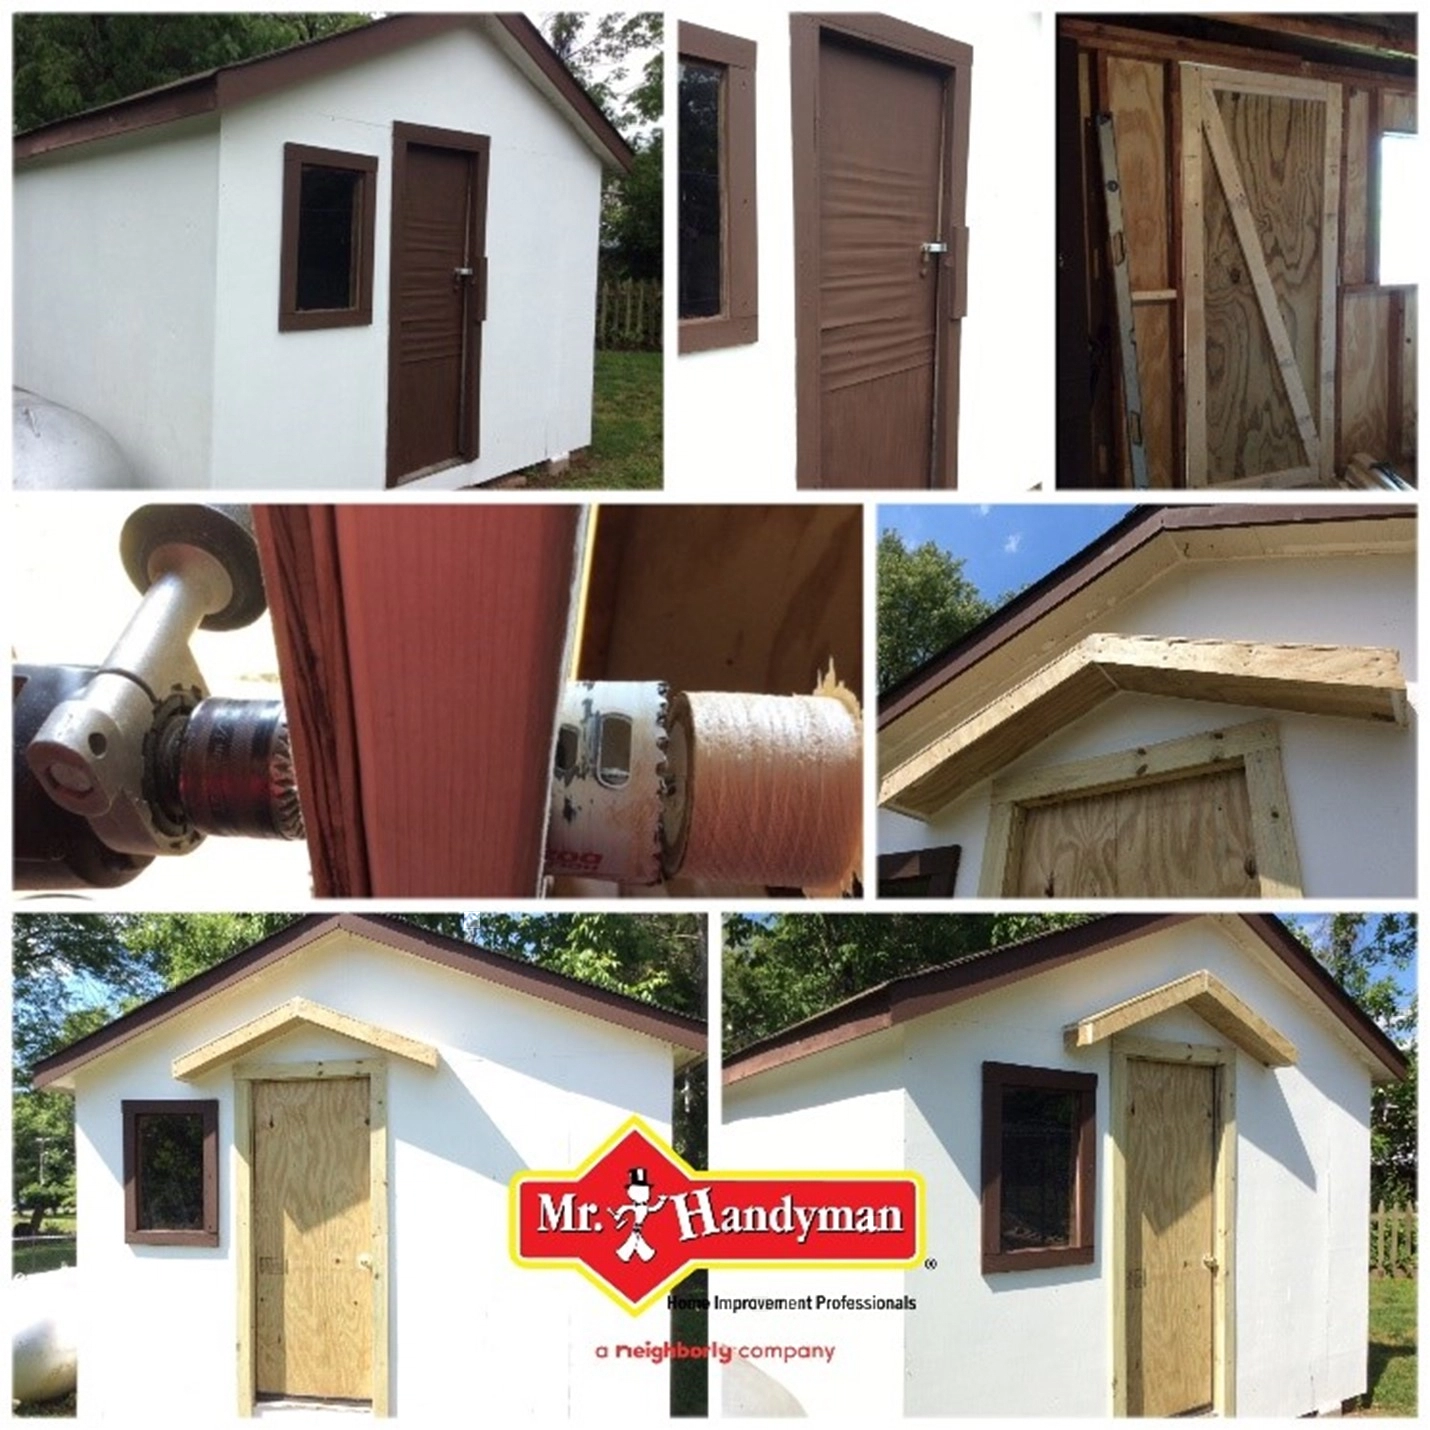 A wooden shed before, during and after installation has been completed for a new shed door.